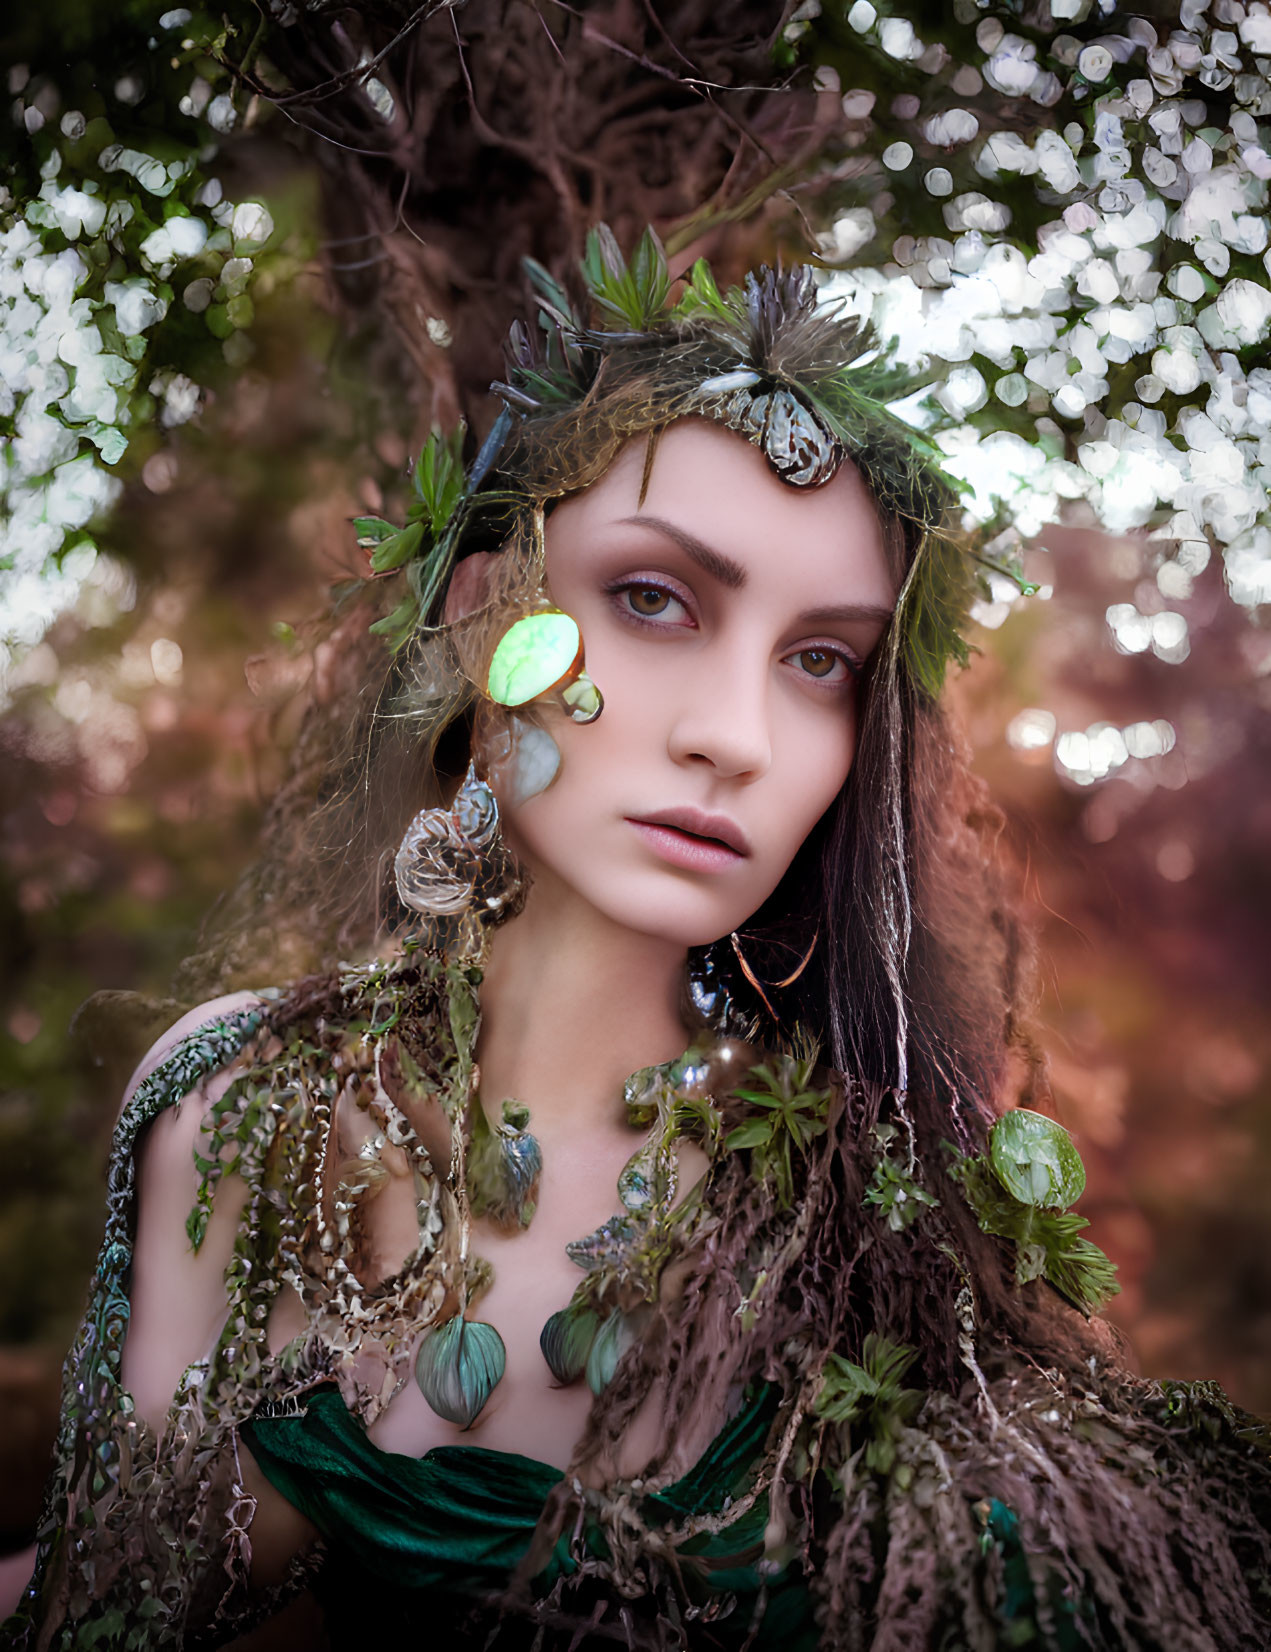 Fantasy-style costume with leafy headpiece and jewelry on nature bokeh background